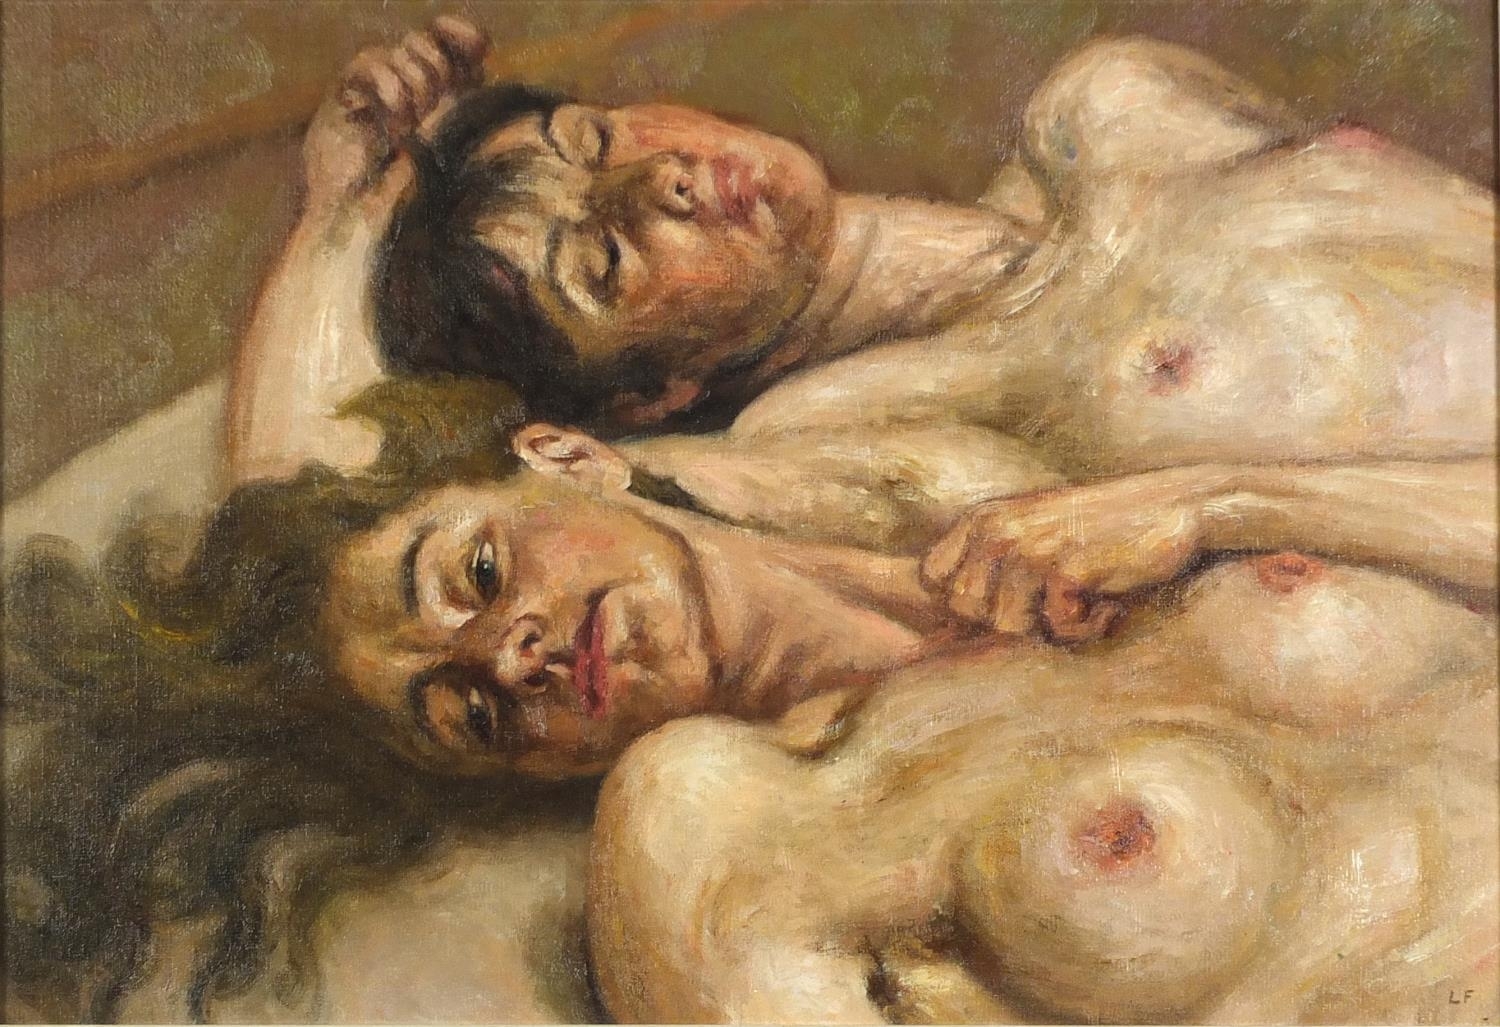 Two nude lovers by Lucian Freud